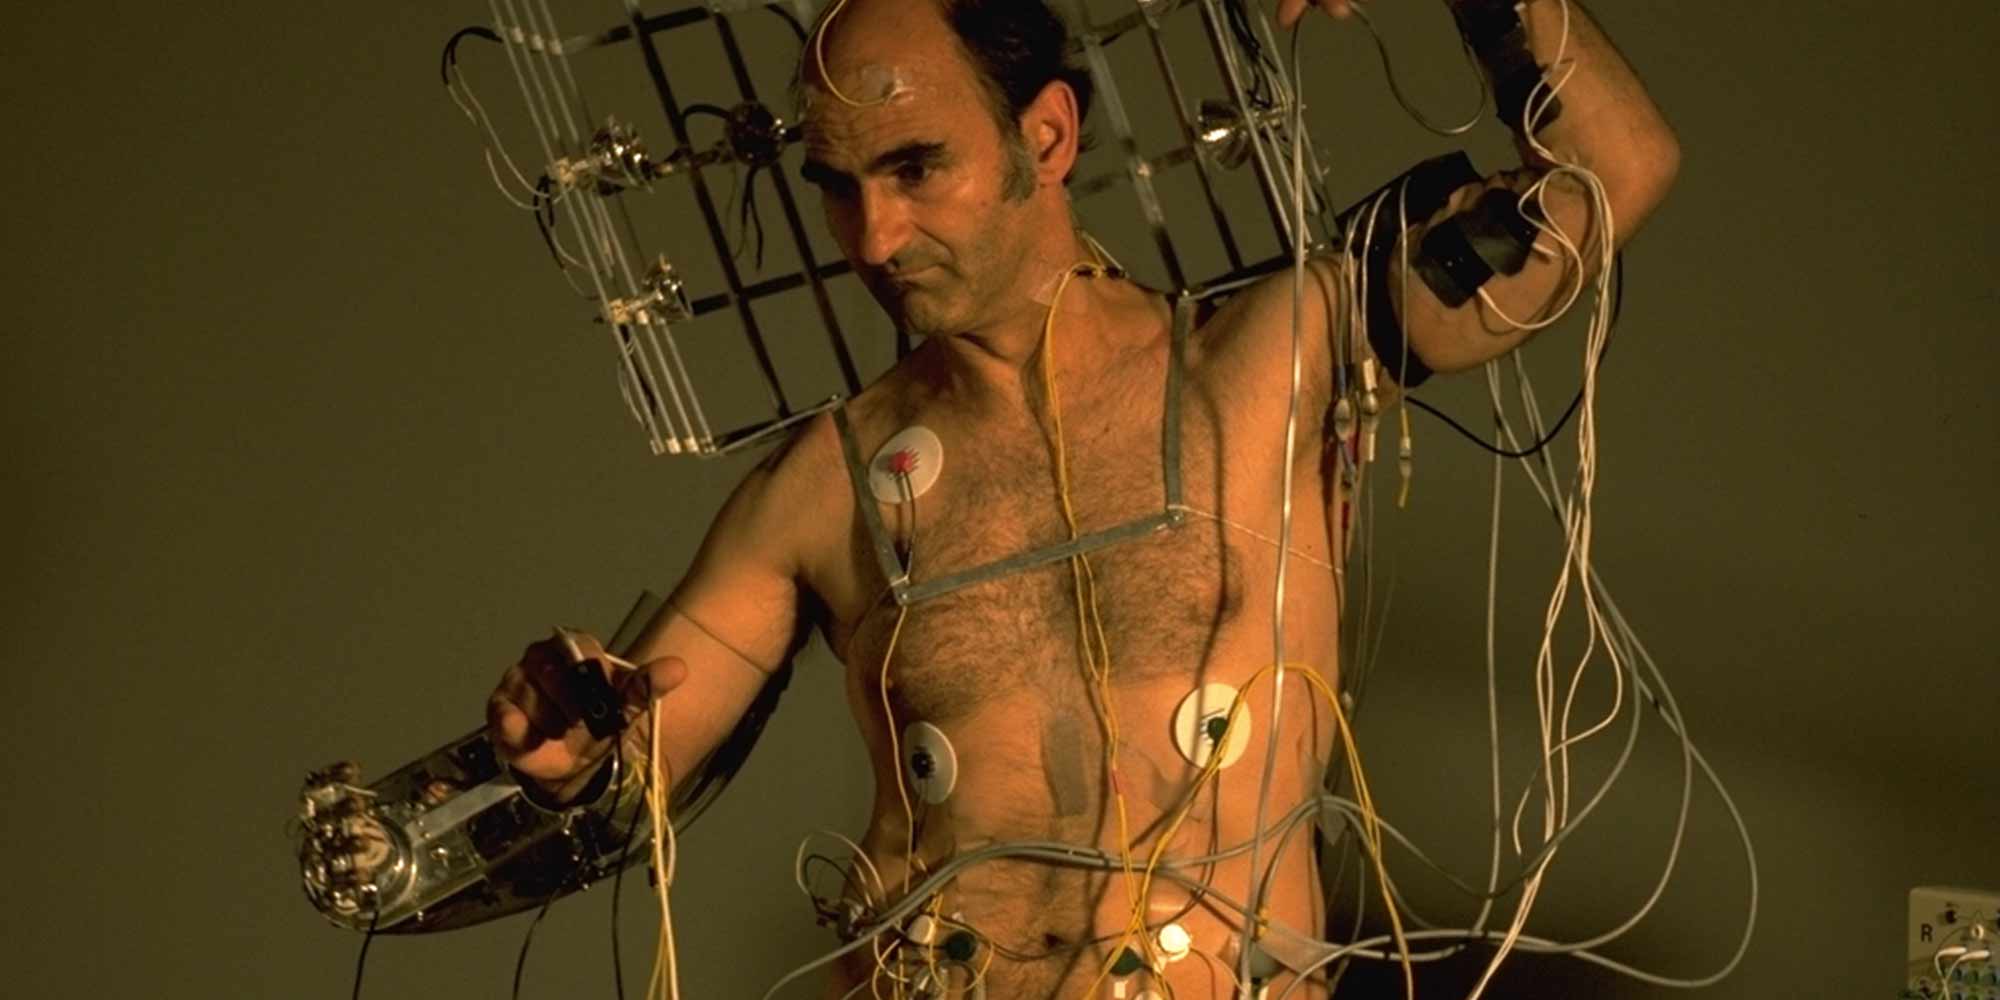 <strong>1992:</strong> "The human body is obsolete" says Stelarc and merges body and technology in his performances.